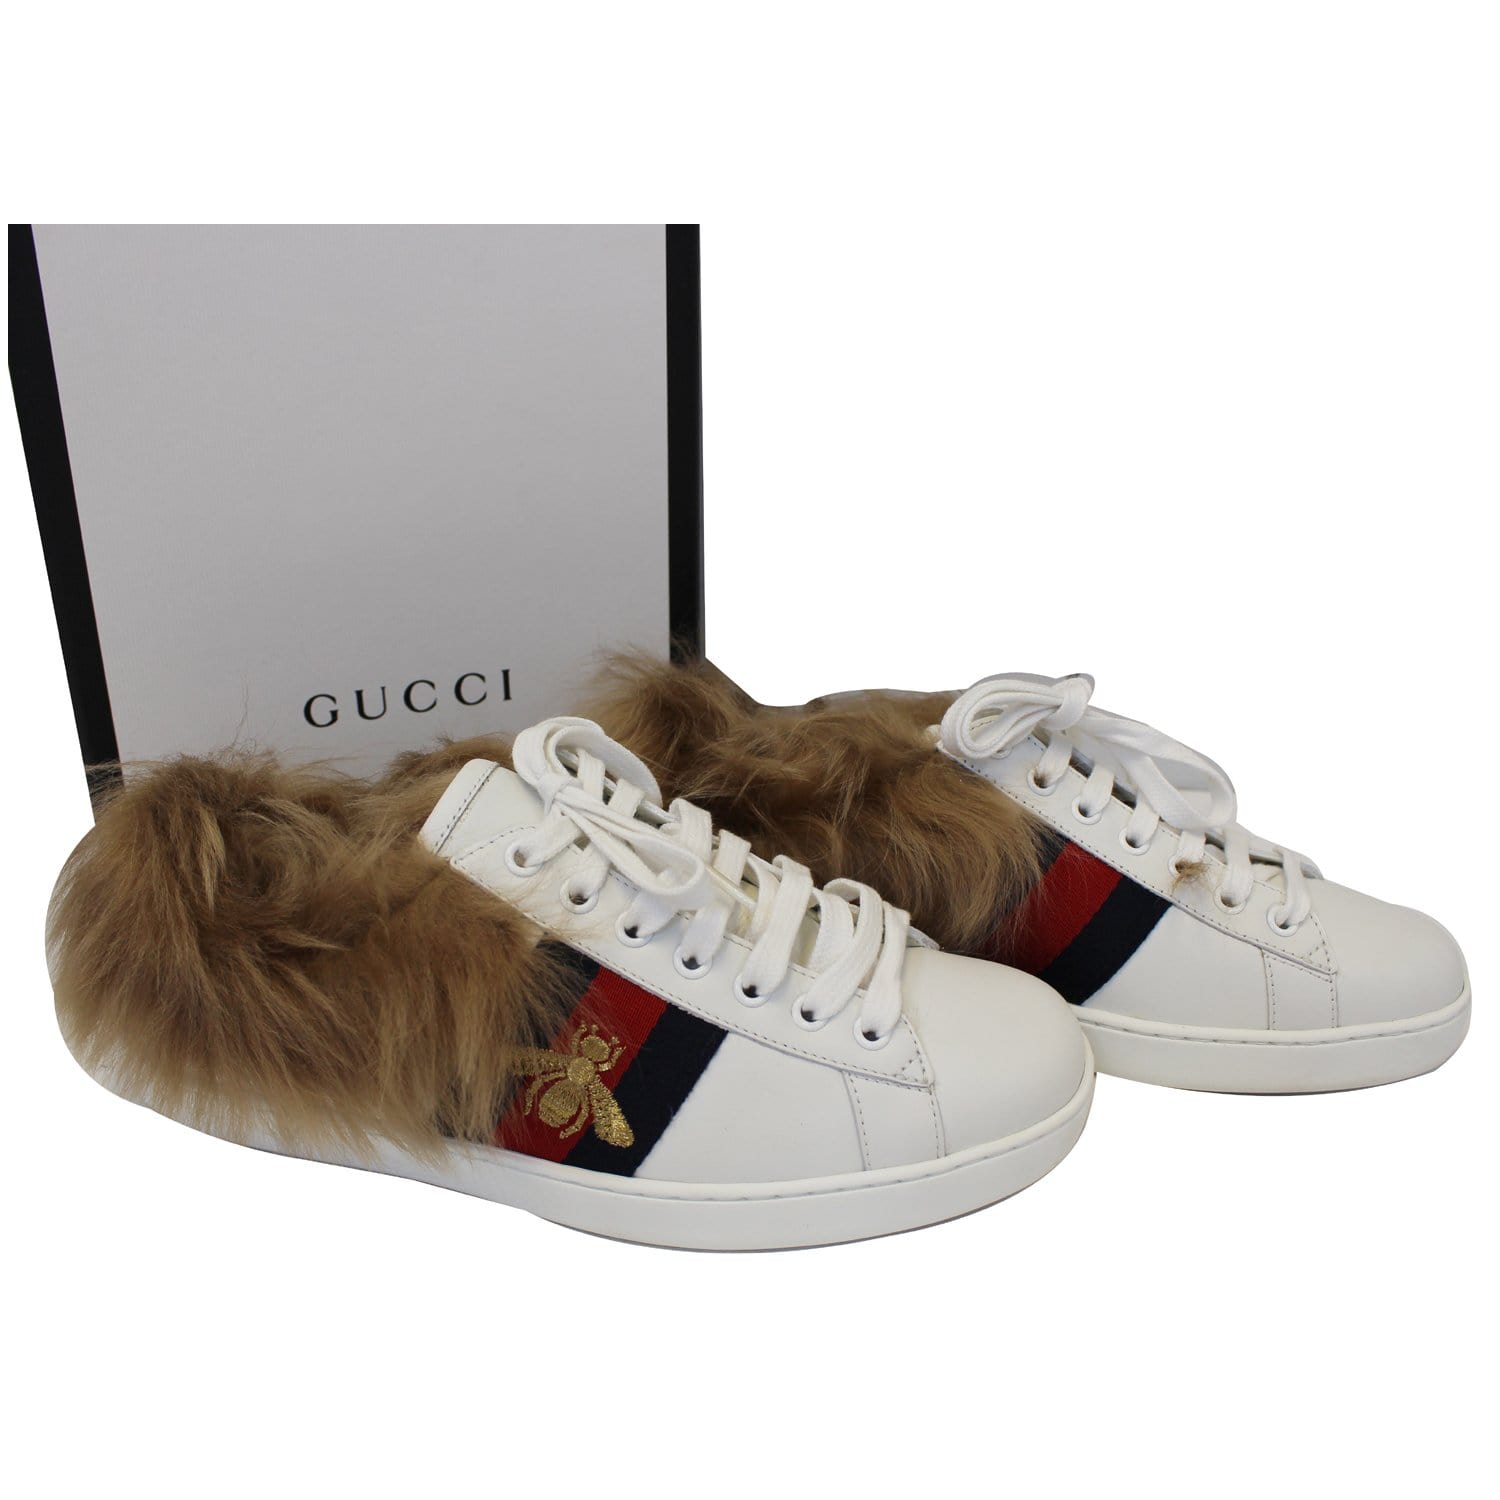 gasformig Sund mad rigtig meget GUCCI New Ace Lamb Fur Lace Up Sneakers White-US